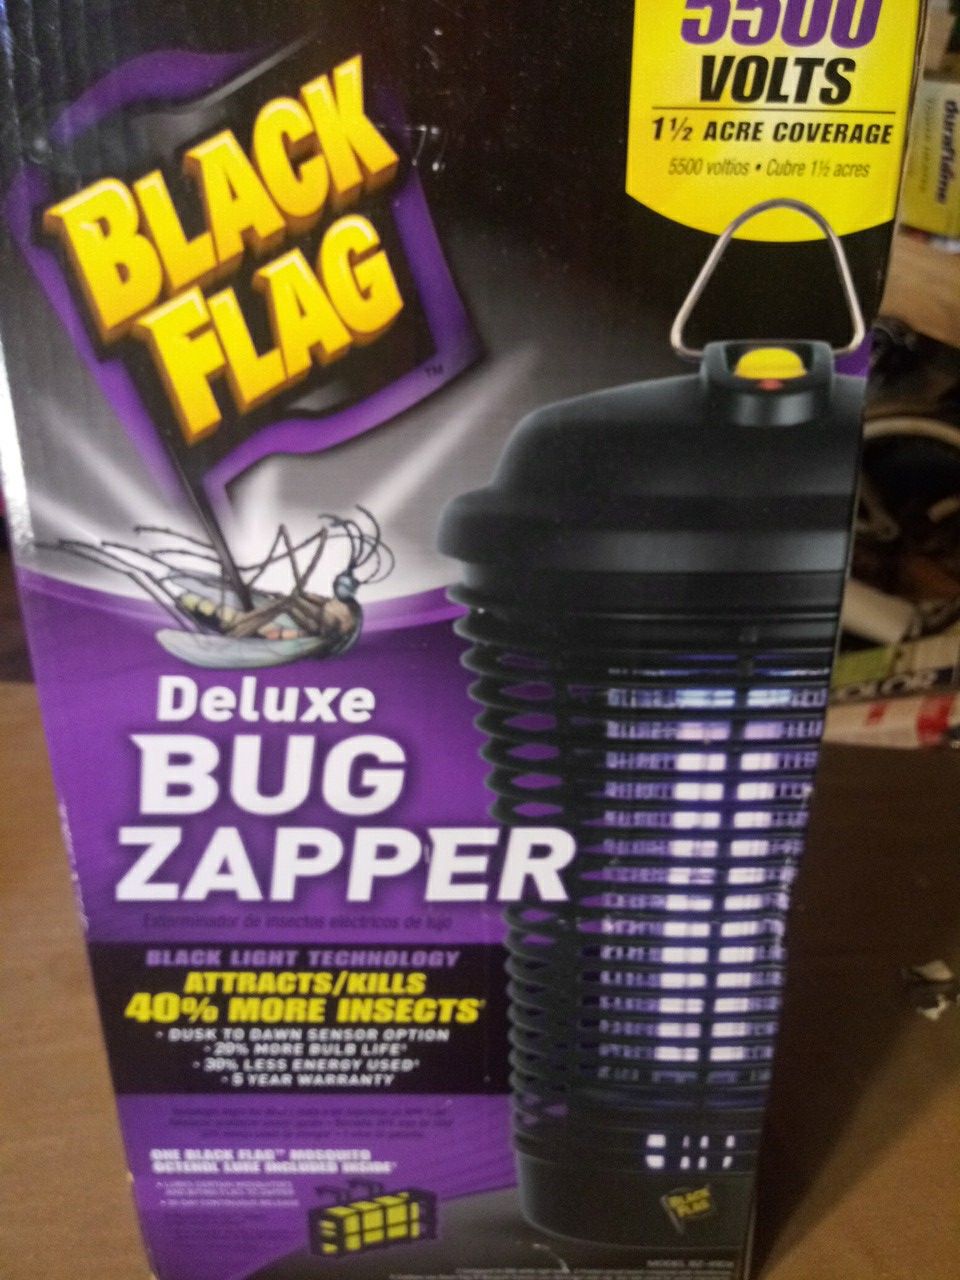 Deluxe bug zapper 5500 volts